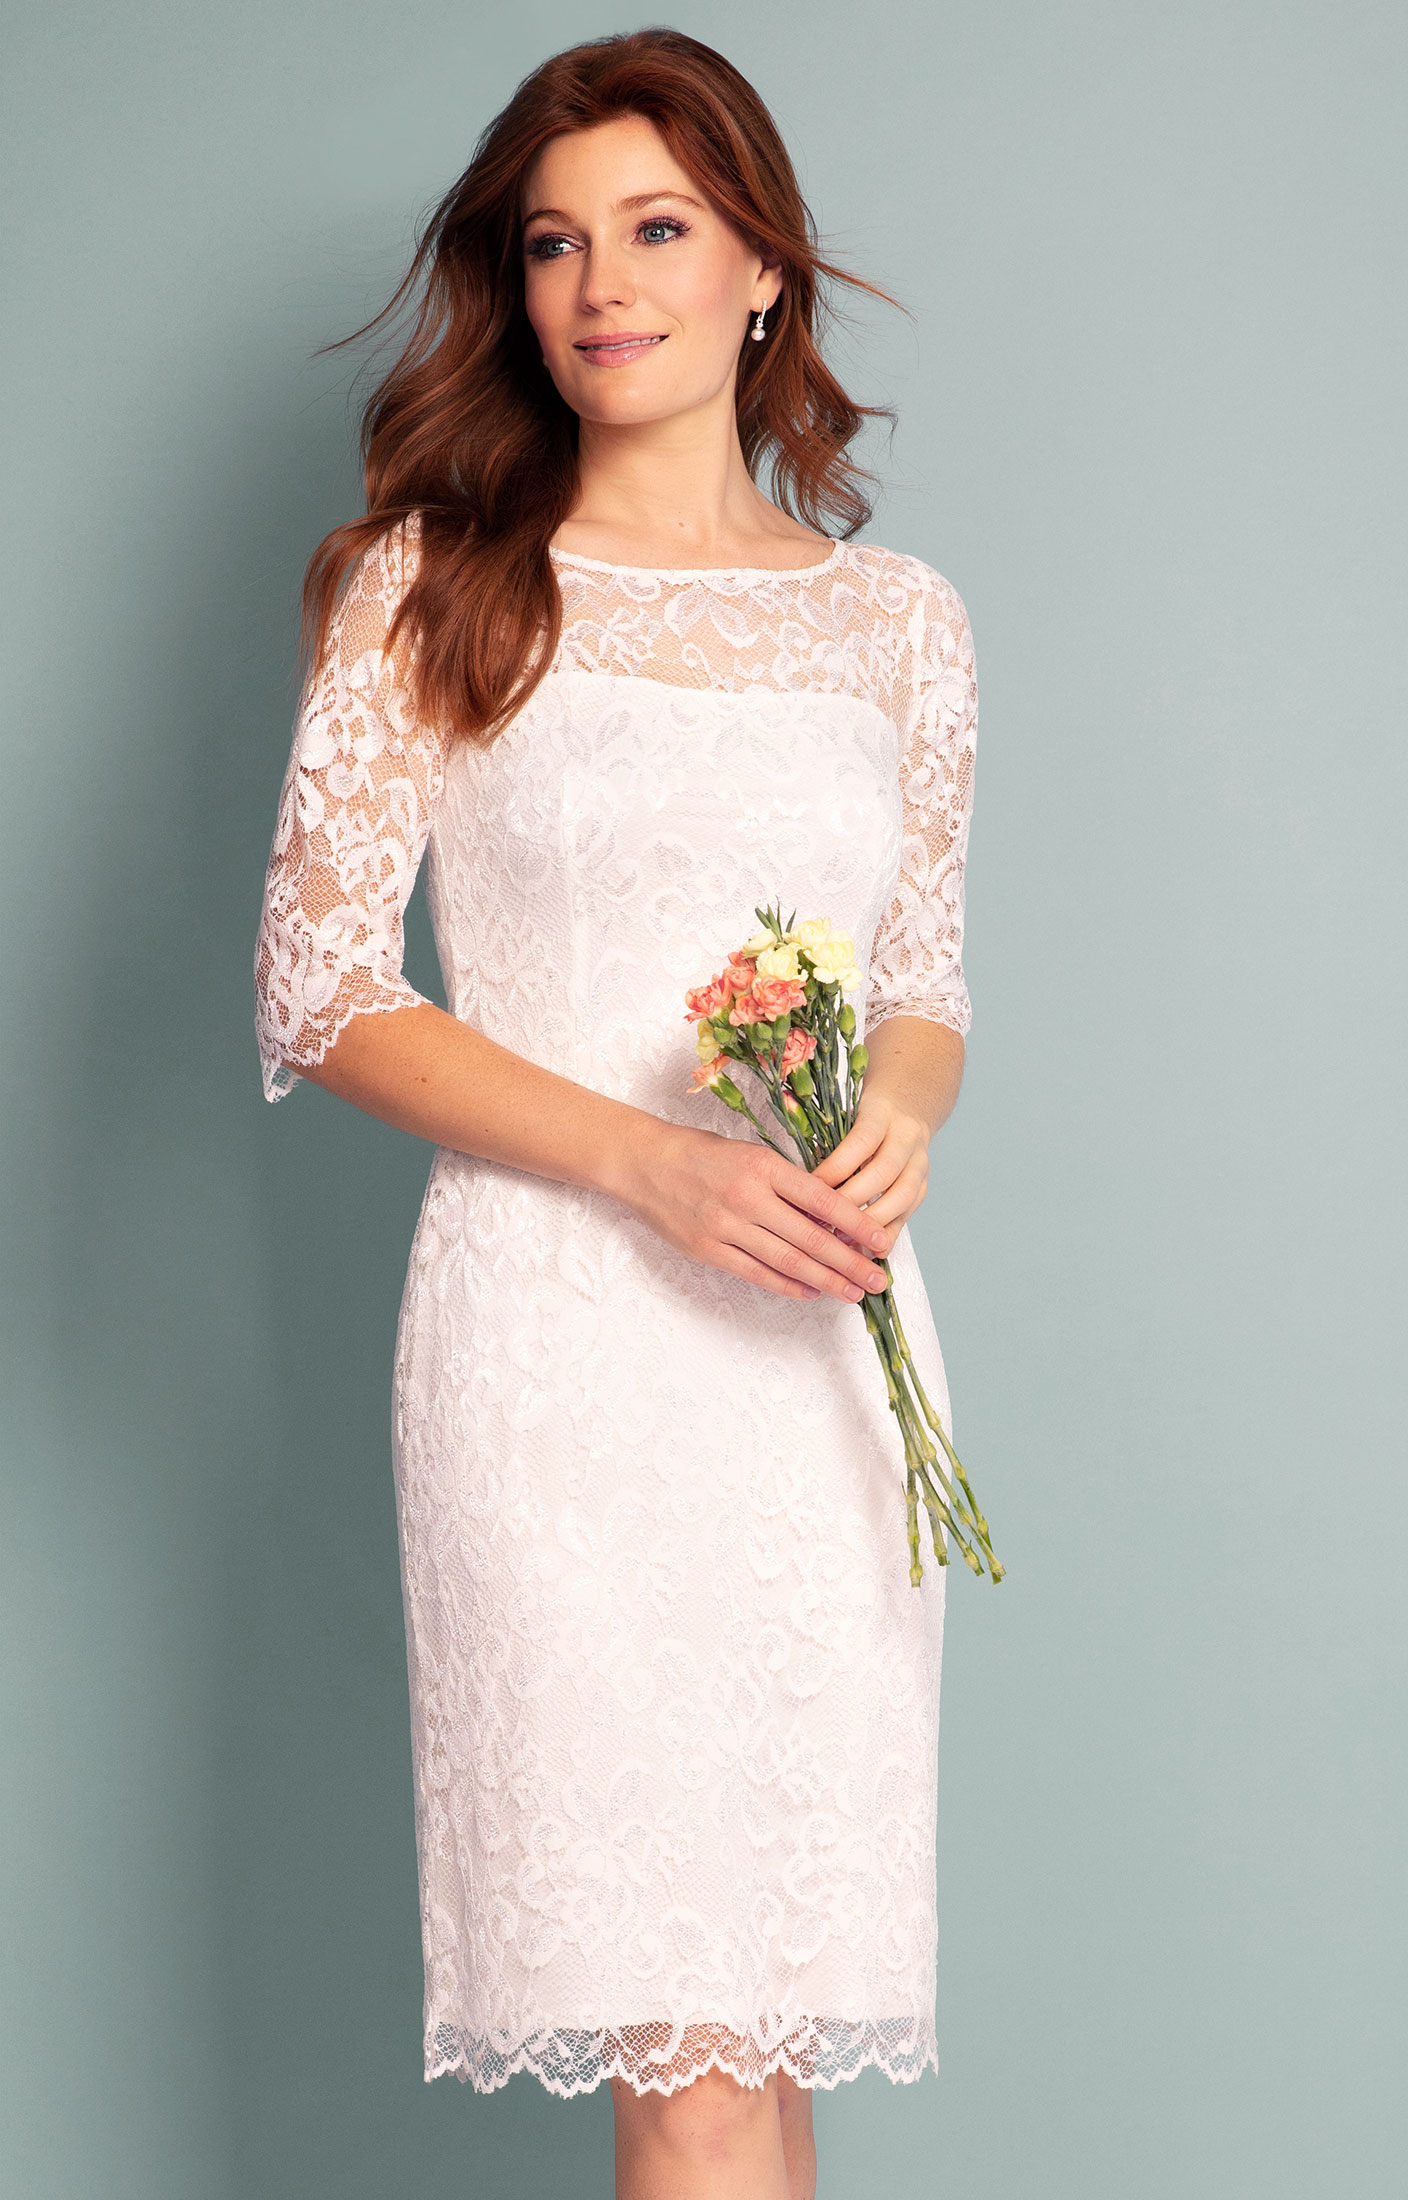 Lila Wedding Dress Short Ivory - Wedding Dresses, Evening Wear and Party  Clothes by Alie Street.